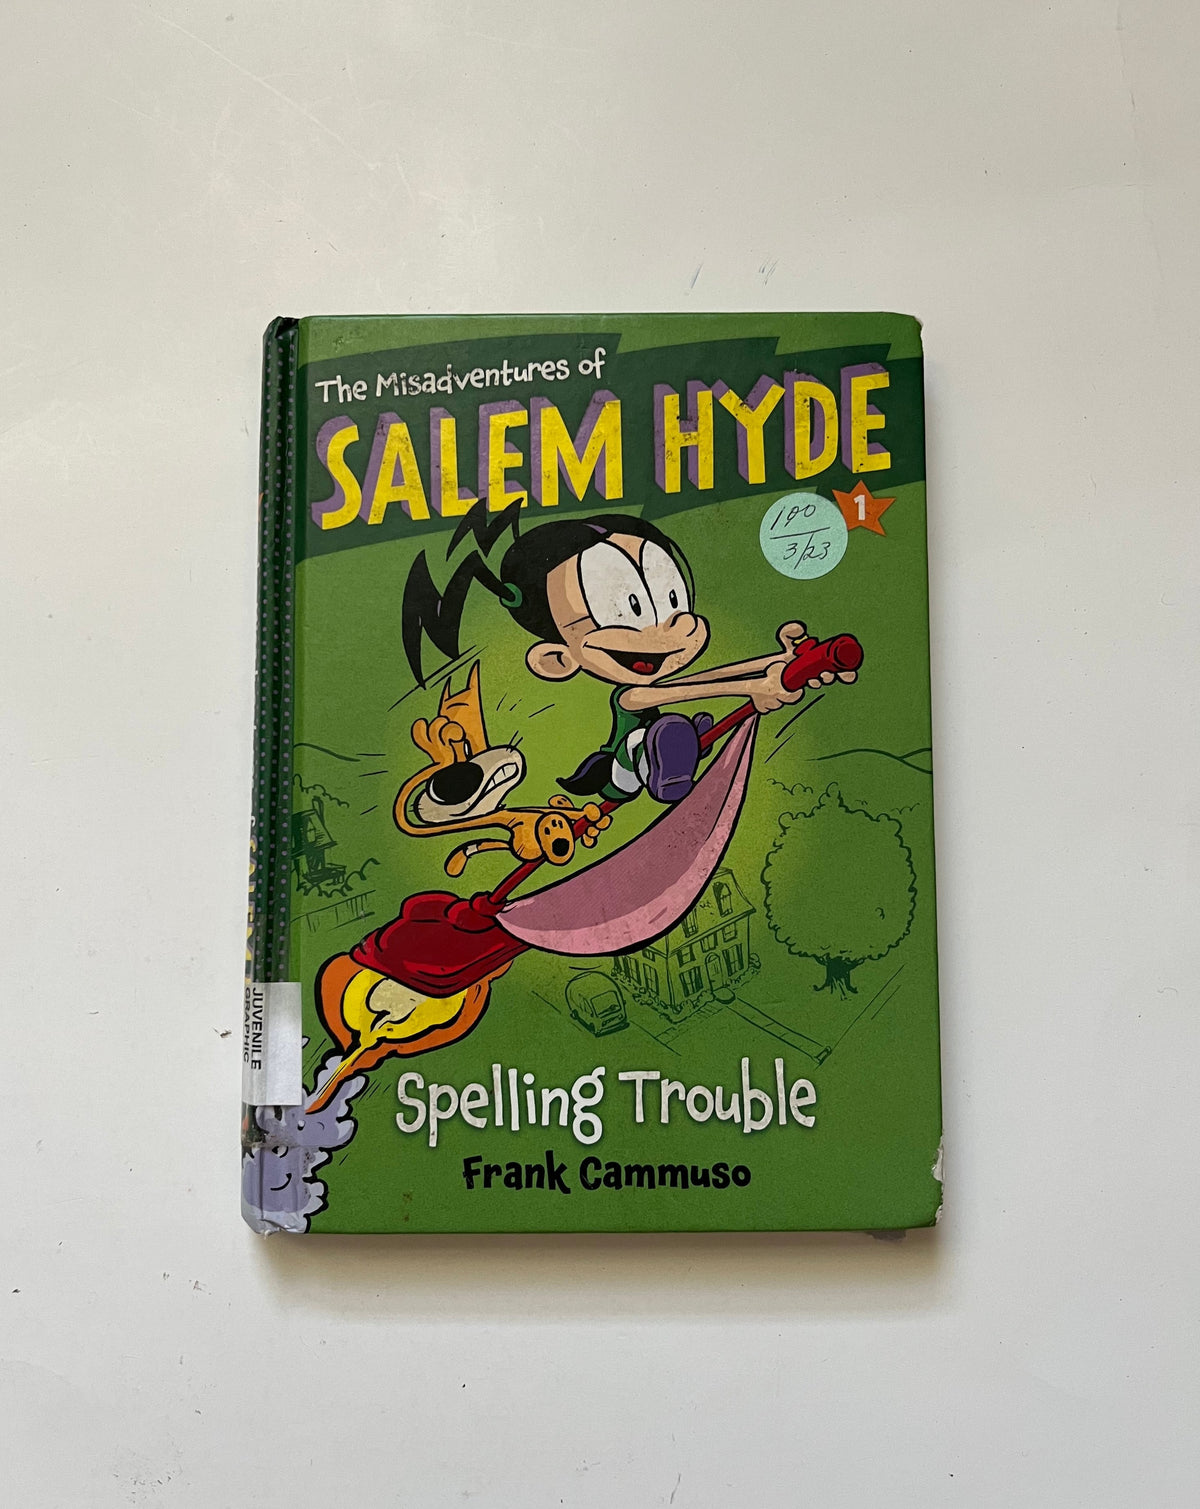 The Misadventures of Salem Hyde: Spelling Trouble by Frank Cammuso